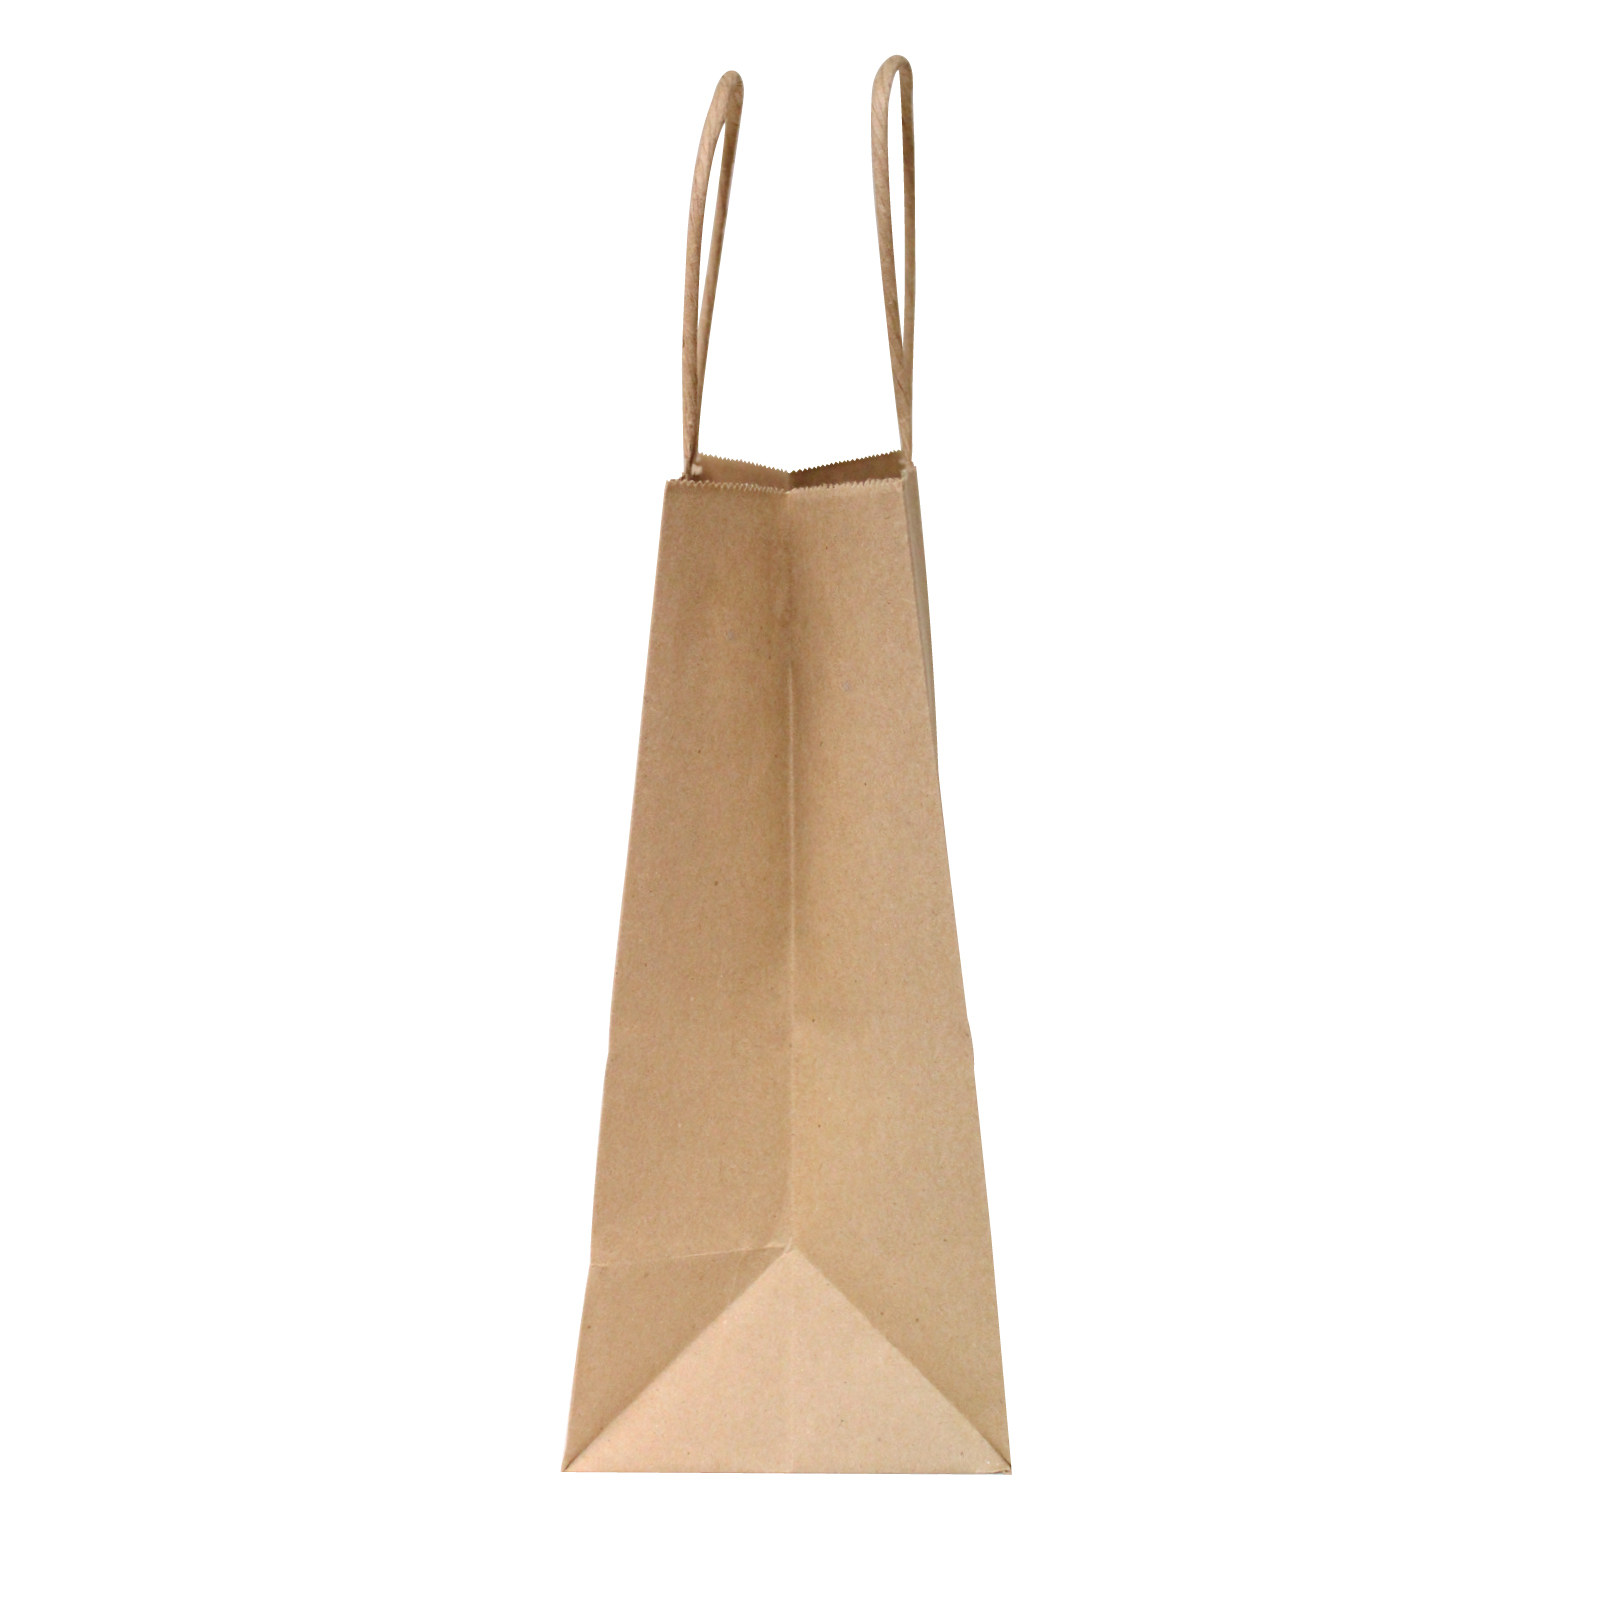 8"x4.75"x10", 50 Piece, Natural Brown Kraft Paper Bags, Shopping, Mechandise, Party, Gift Bags - image 3 of 4